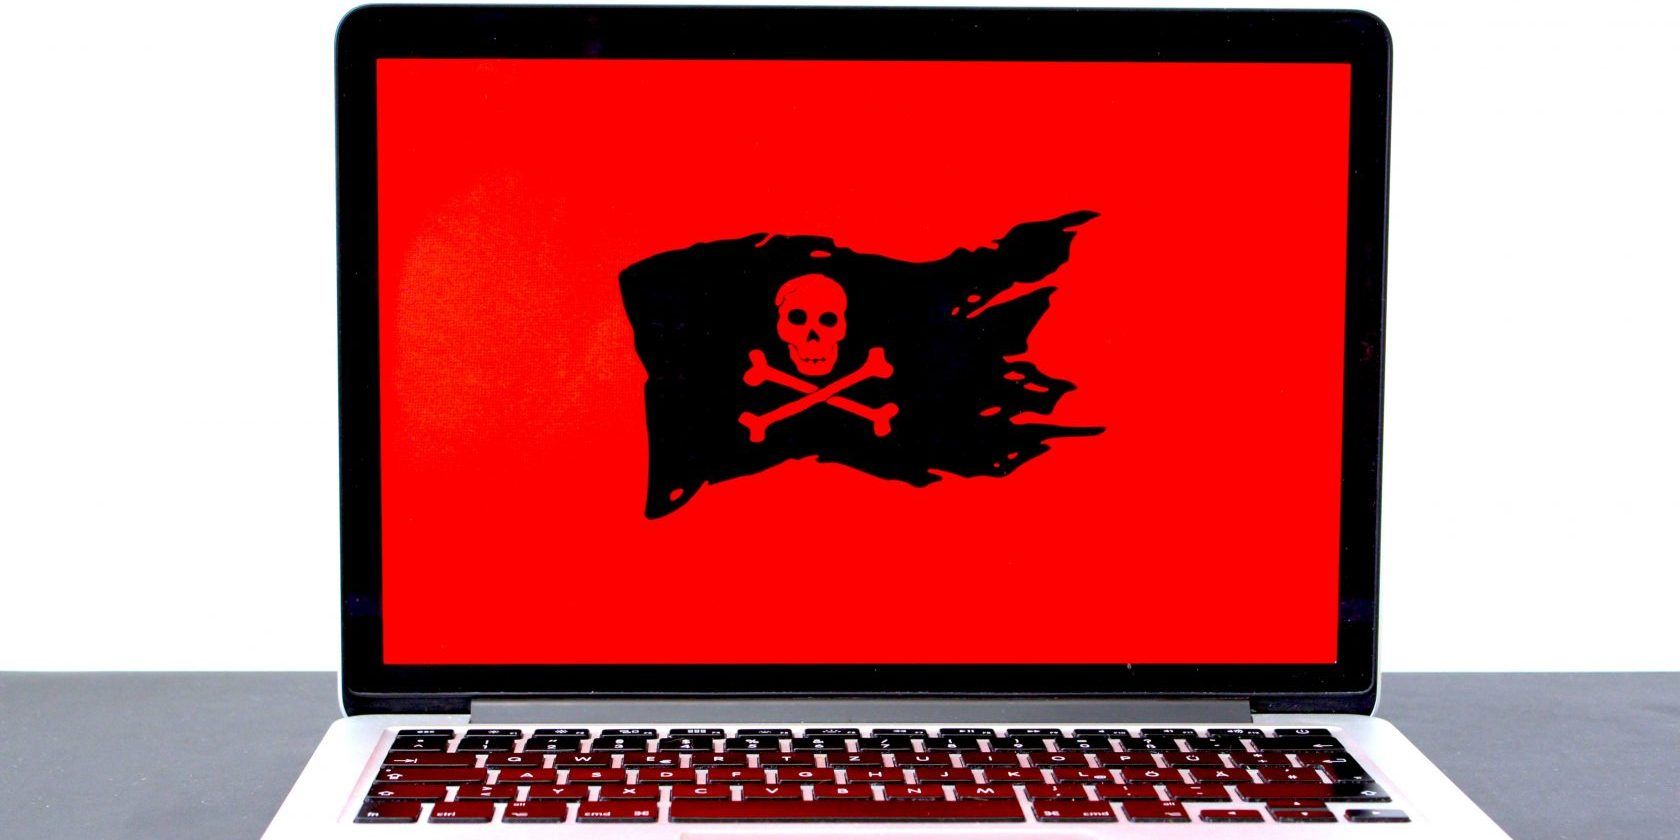 Red flag hackers featured